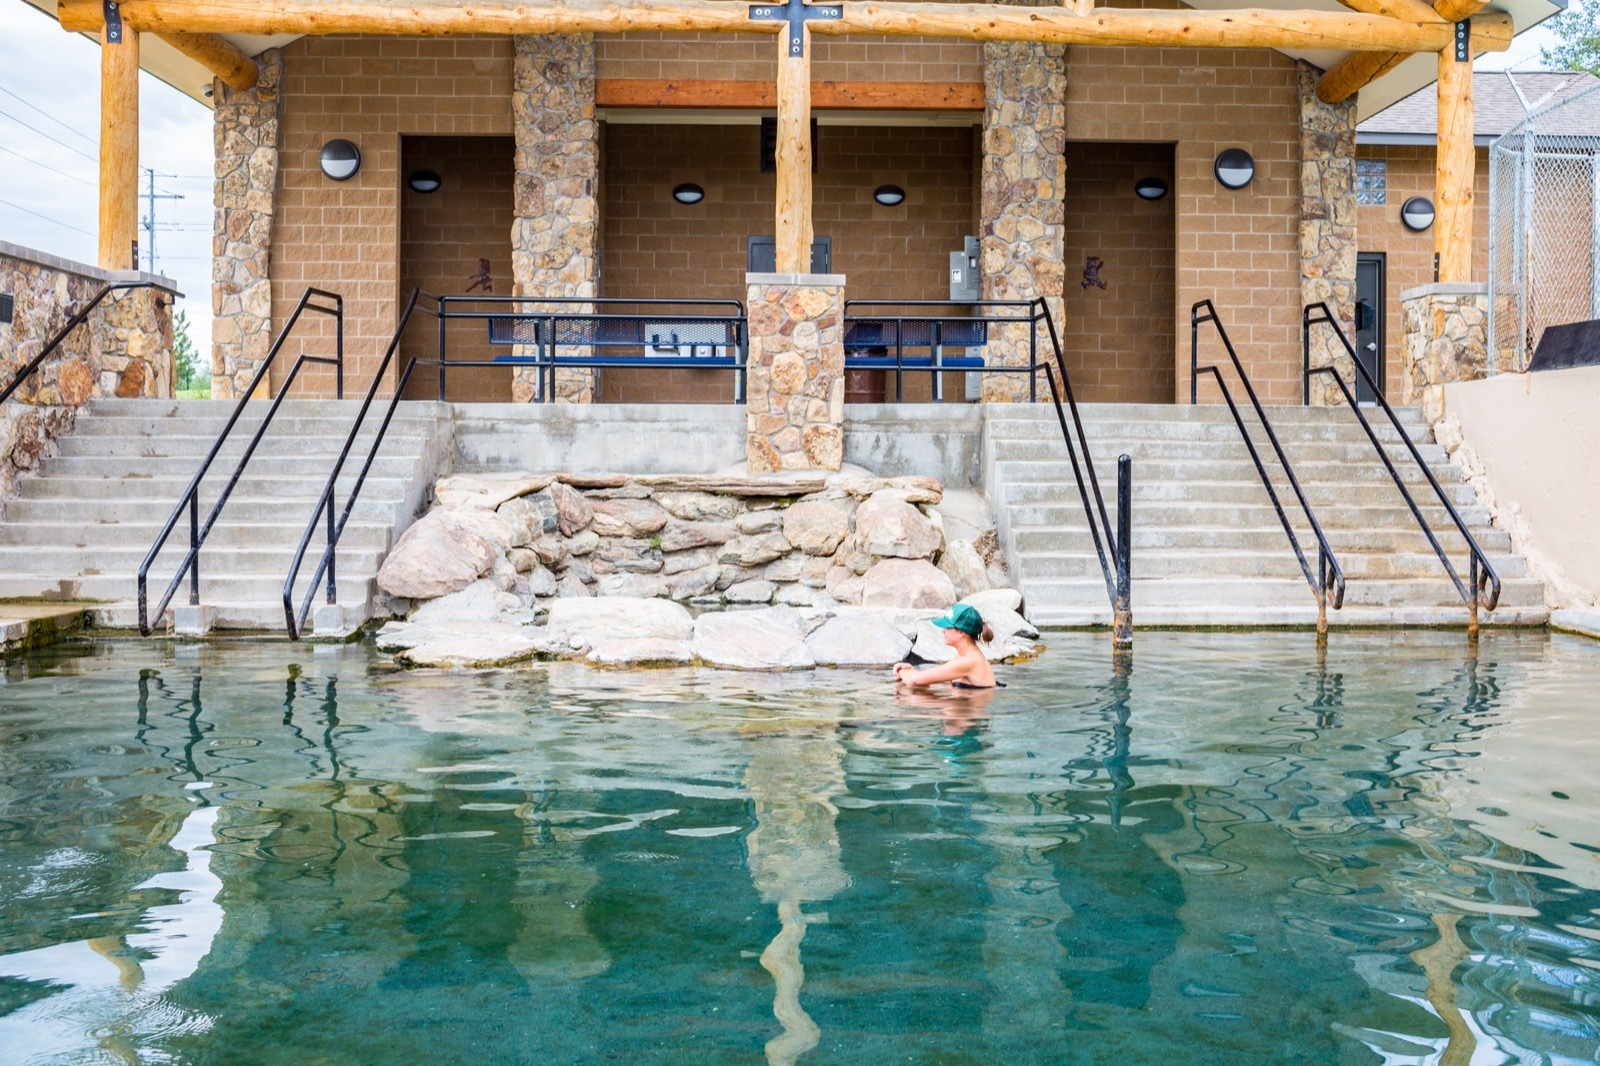 Escape to Saratoga's hobo hot springs (they're free)